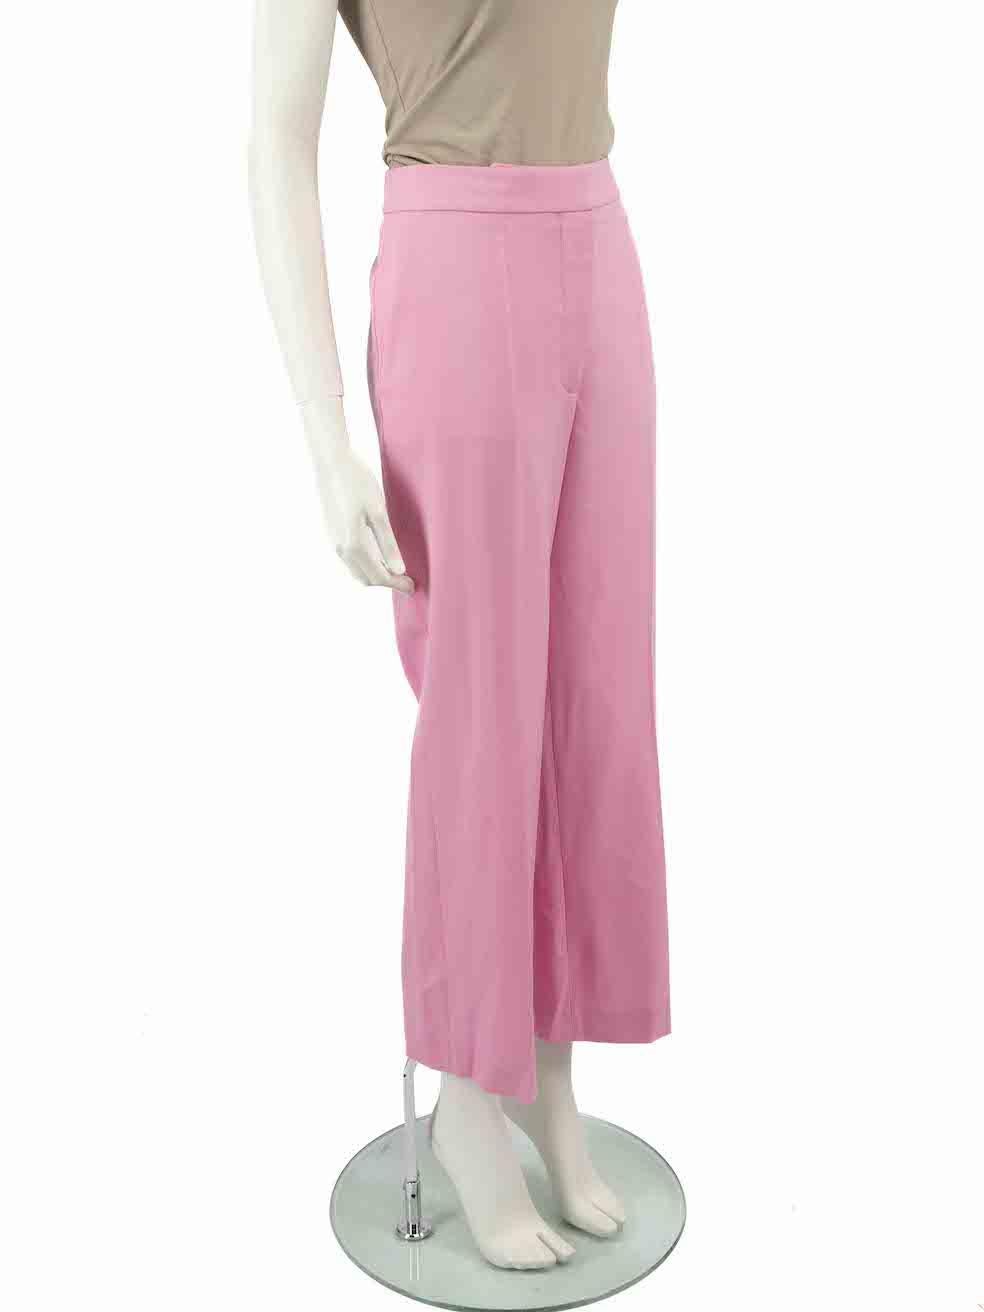 CONDITION is Never worn, with tags. No visible wear to trousers is evident, however the metal hooks at the lining have left discolouration to the fabric due to poor storage on this new Stella McCartney designer resale item.
 
 
 
 Details
 
 
 Pink
